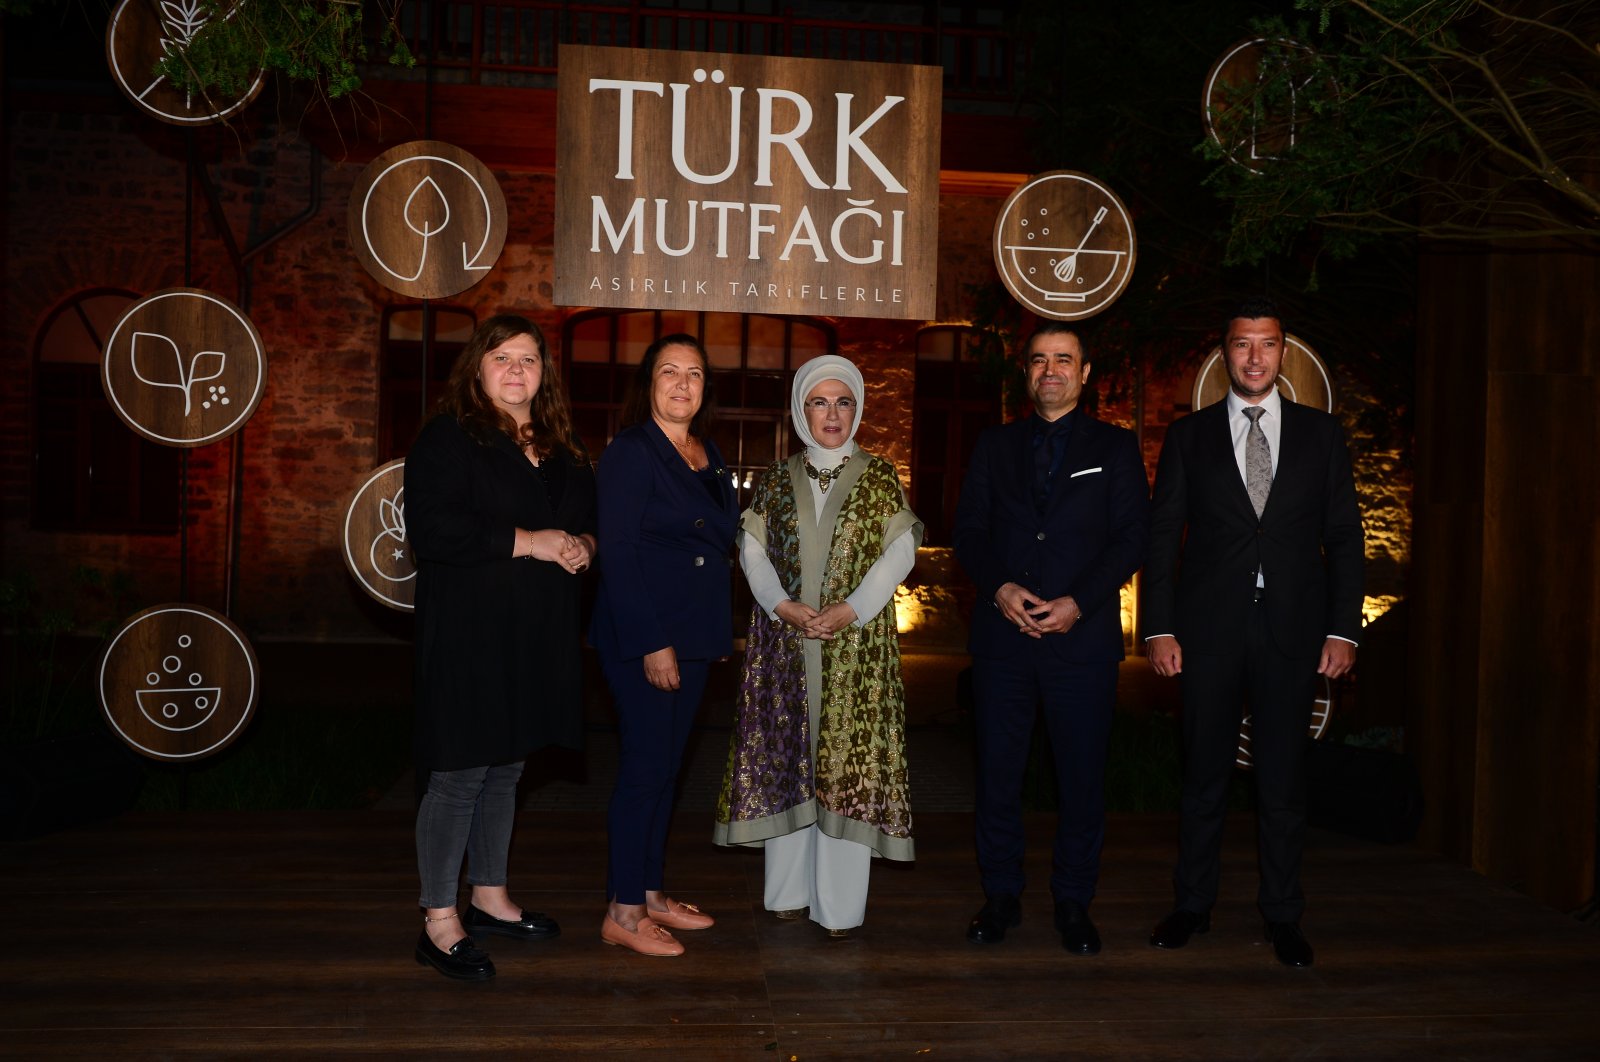 The launch meeting of &quot;Turkish Cuisine with Centennial Recipes&quot; with first lady Emine Erdoğan (C), Ankara, Türkiye, Sept. 8, 2021. (Sabah Archive Photo)